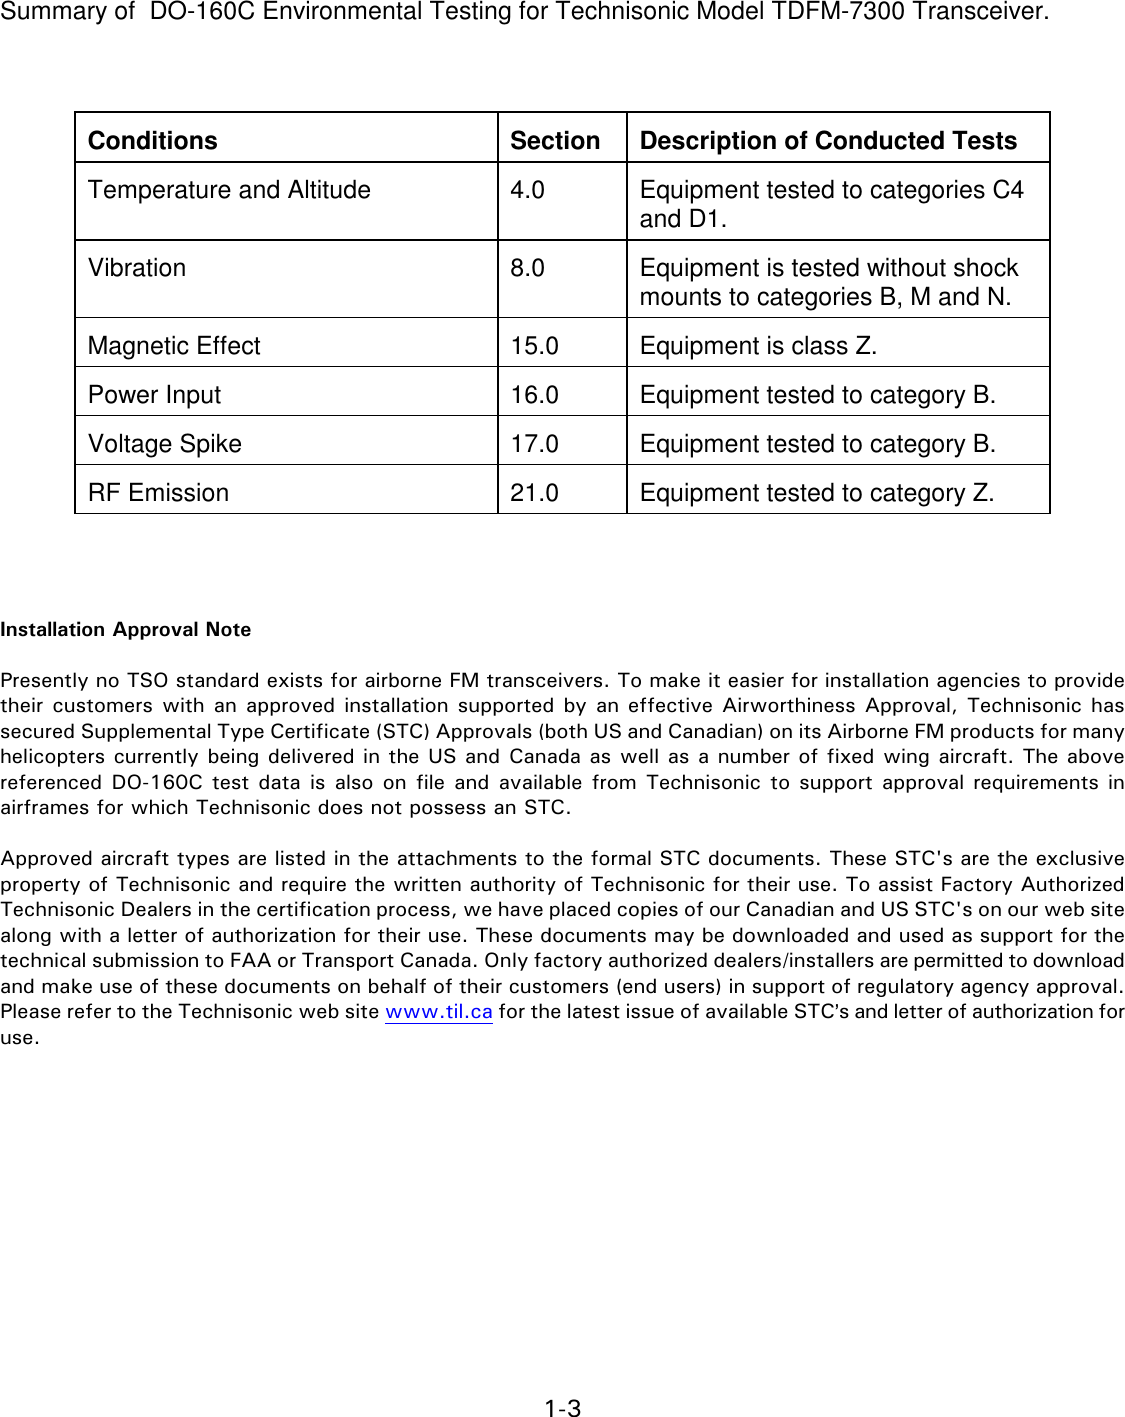 1-3    Summary of  DO-160C Environmental Testing for Technisonic Model TDFM-7300 Transceiver.     Conditions   Section   Description of Conducted Tests  Temperature and Altitude   4.0   Equipment tested to categories C4 and D1.  Vibration   8.0   Equipment is tested without shock mounts to categories B, M and N.  Magnetic Effect   15.0   Equipment is class Z.  Power Input   16.0   Equipment tested to category B.  Voltage Spike   17.0   Equipment tested to category B.  RF Emission   21.0   Equipment tested to category Z.     Installation Approval Note  Presently no TSO standard exists for airborne FM transceivers. To make it easier for installation agencies to provide their  customers with an approved  installation supported by an effective  Airworthiness  Approval,  Technisonic  has secured Supplemental Type Certificate (STC) Approvals (both US and Canadian) on its Airborne FM products for many helicopters currently being delivered in the US and Canada as well as a number of fixed wing aircraft. The above referenced  DO-160C test  data is  also  on  file  and  available  from Technisonic to  support  approval requirements  in airframes for which Technisonic does not possess an STC.  Approved aircraft types are listed in the attachments to the formal STC documents. These STC&apos;s are the exclusive property of Technisonic and require the written authority of Technisonic for their use. To assist Factory Authorized Technisonic Dealers in the certification process, we have placed copies of our Canadian and US STC&apos;s on our web site along with a letter of authorization for their use. These documents may be downloaded and used as support for the technical submission to FAA or Transport Canada. Only factory authorized dealers/installers are permitted to download and make use of these documents on behalf of their customers (end users) in support of regulatory agency approval.  Please refer to the Technisonic web site www.til.ca for the latest issue of available STC=s and letter of authorization for use.              